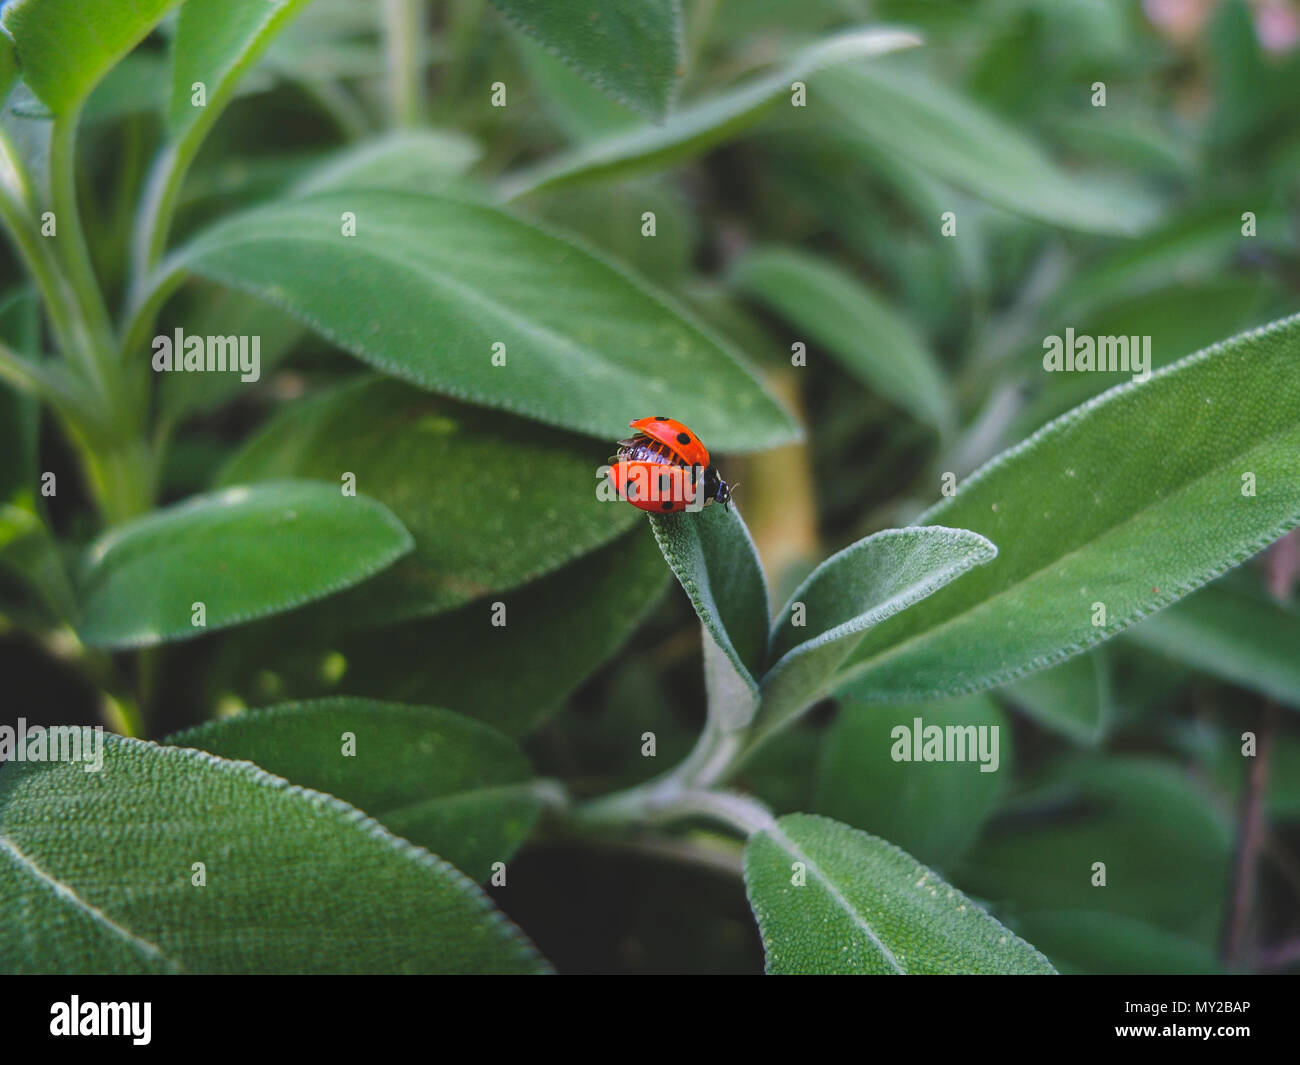 A small and red Ladybug on the sage leaves Stock Photo